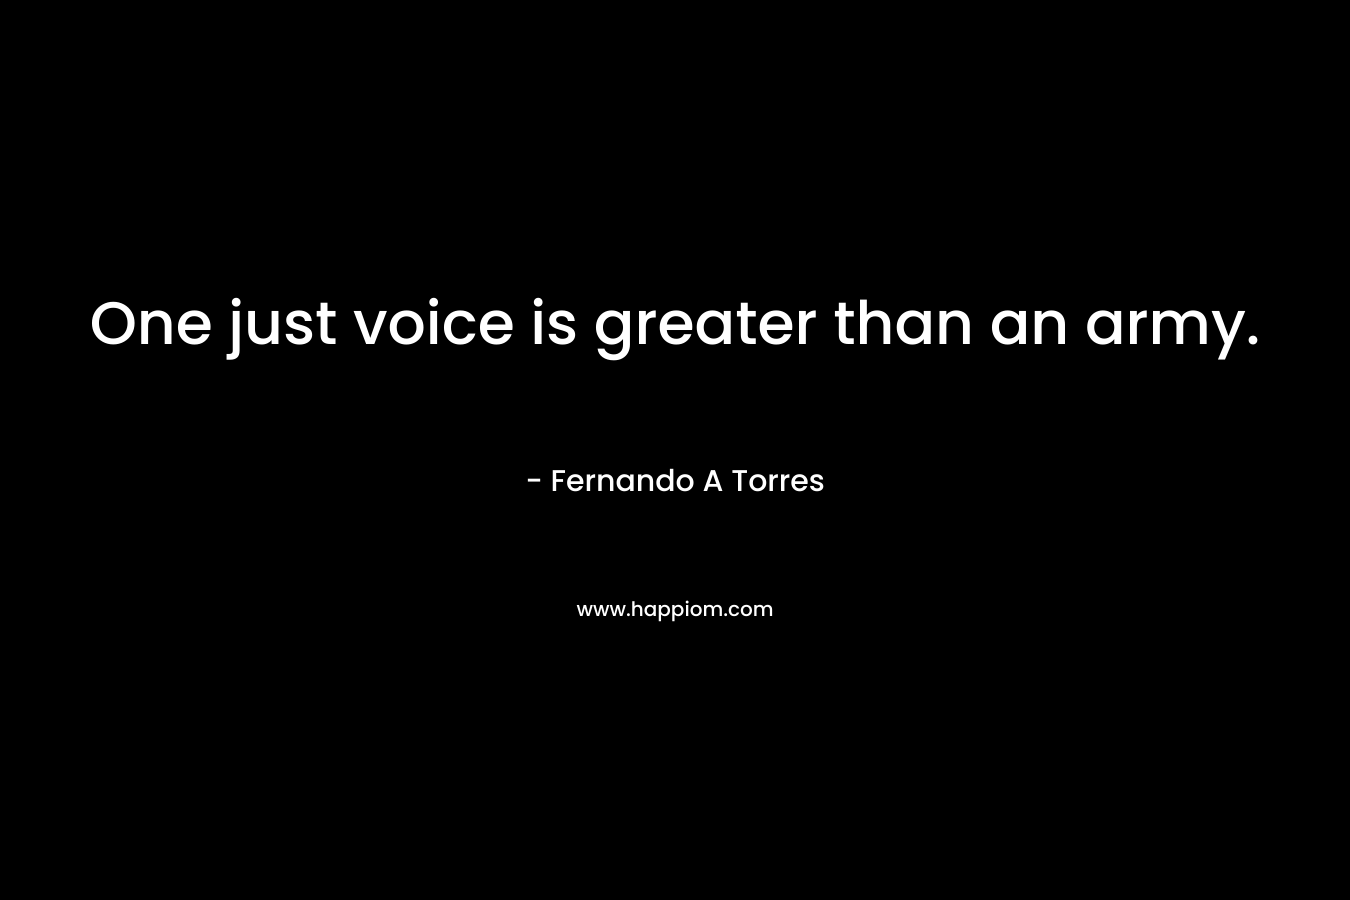 One just voice is greater than an army.